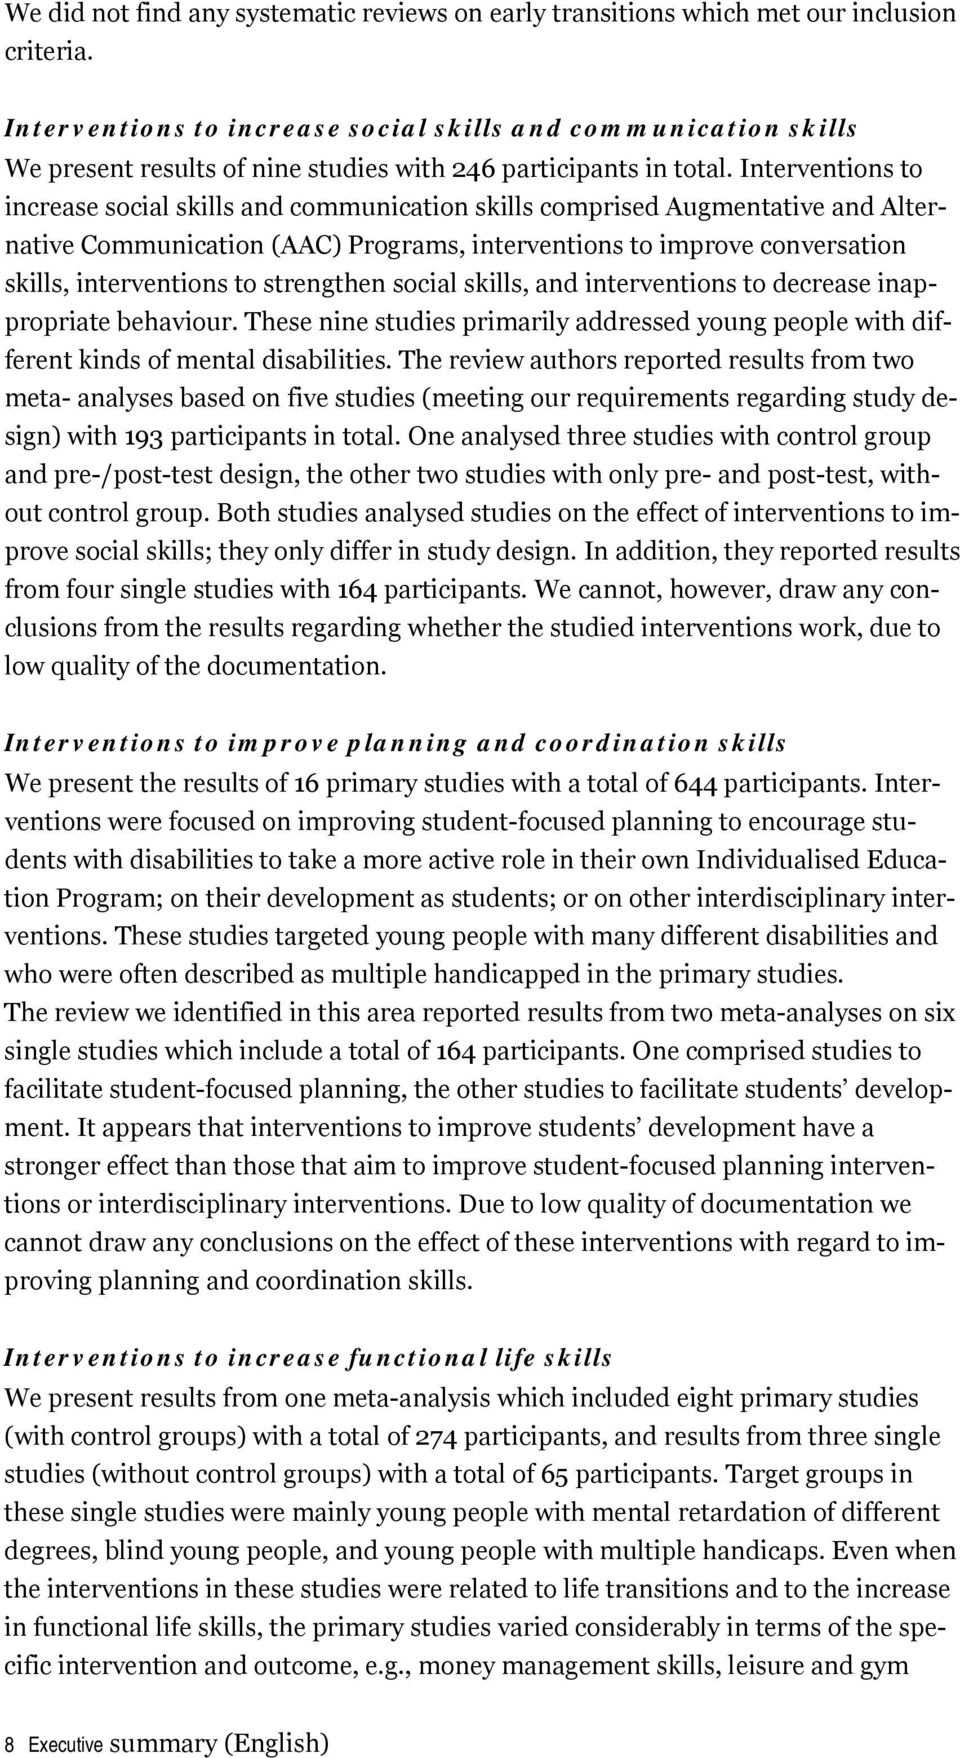 Interventions to increase social skills and communication skills comprised Augmentative and Alternative Communication (AAC) Programs, interventions to improve conversation skills, interventions to